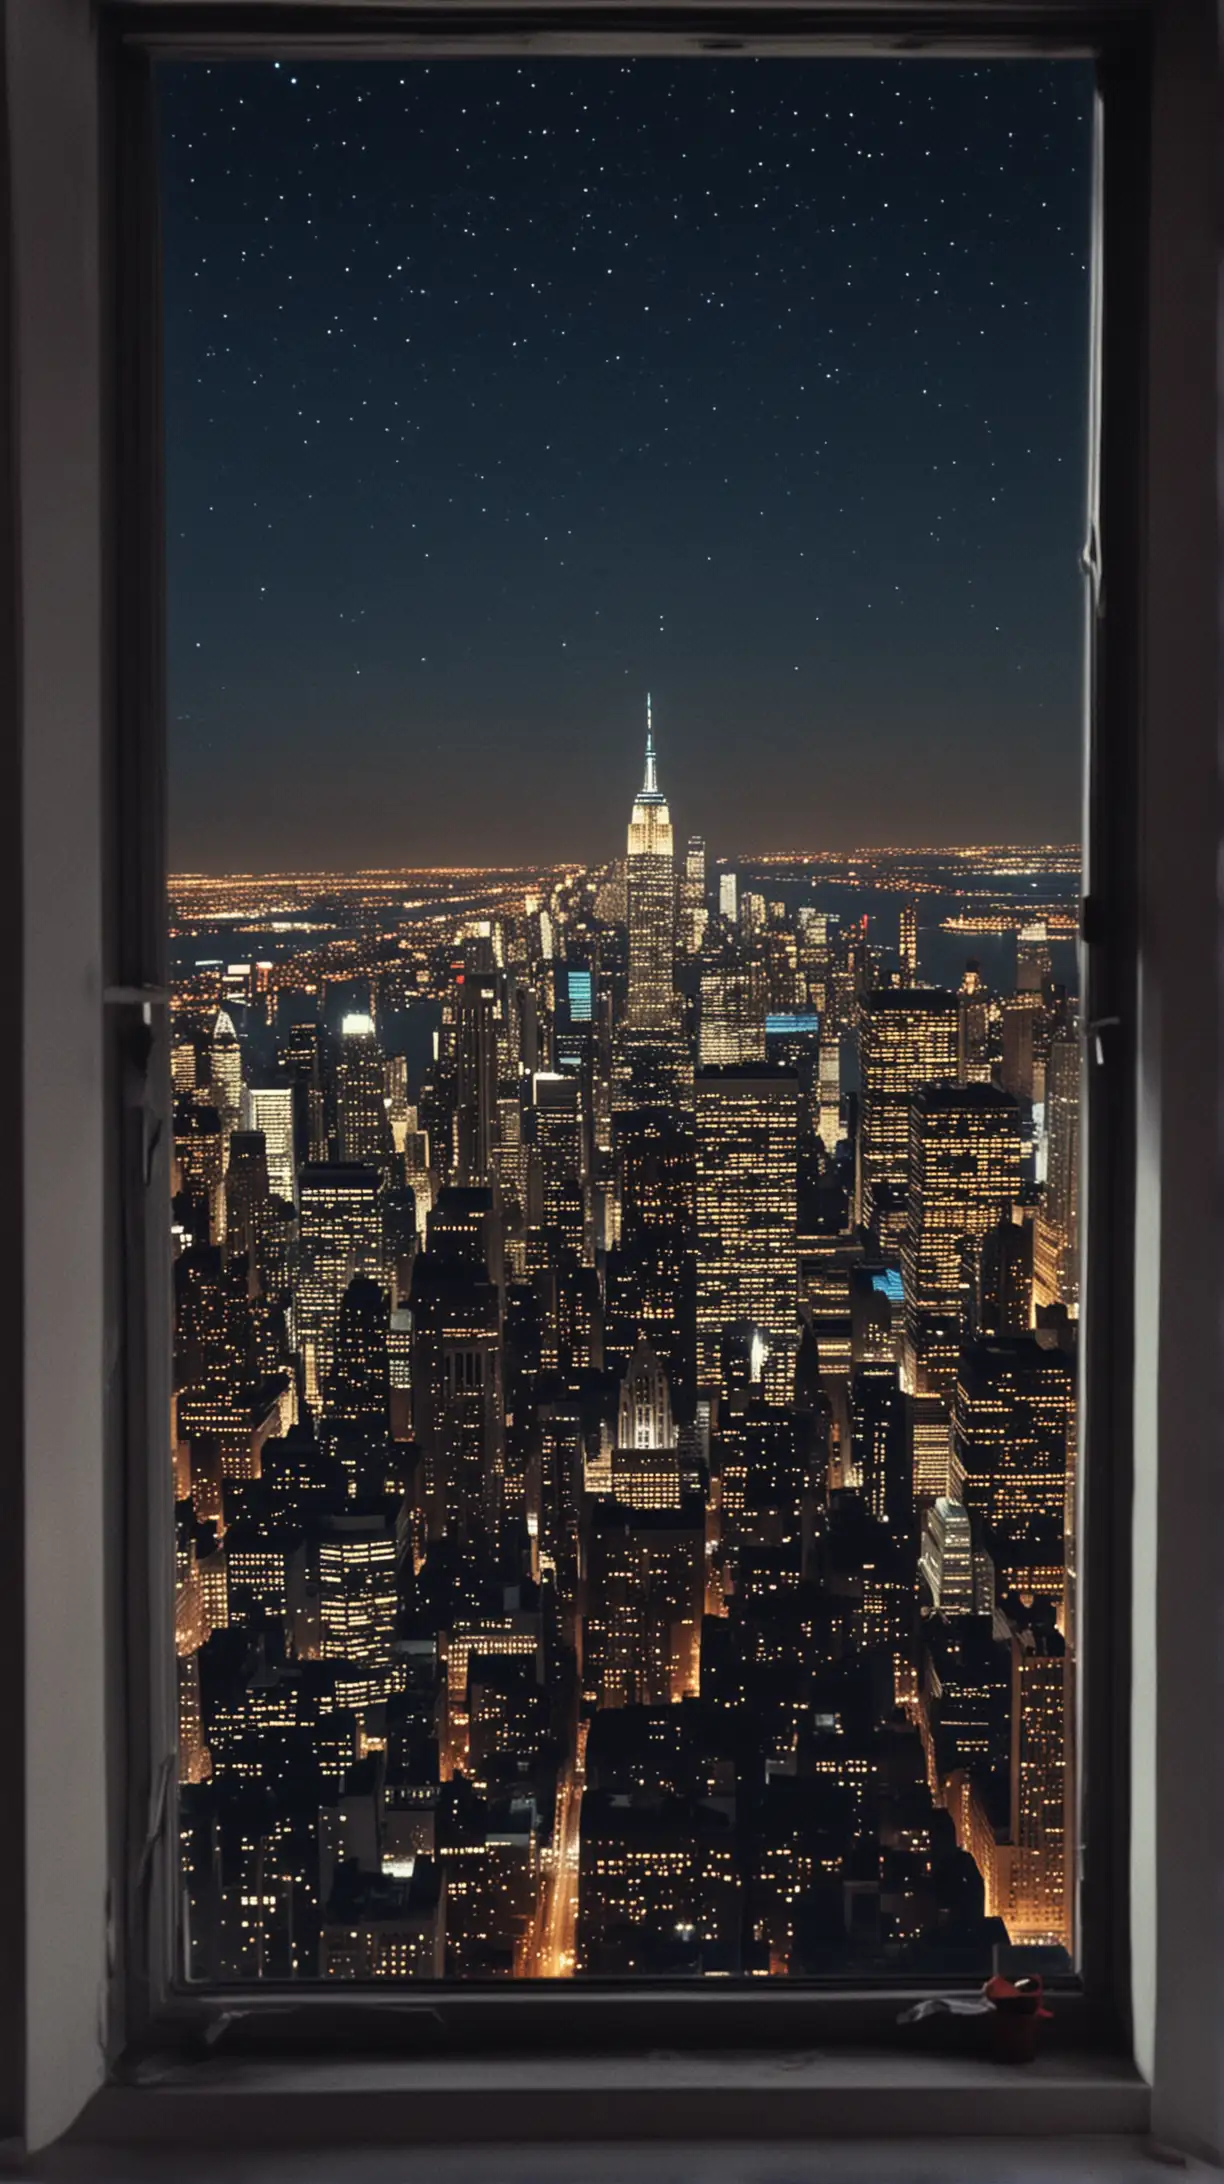 1980s Night Skyline View of New York City from a Window with Stars